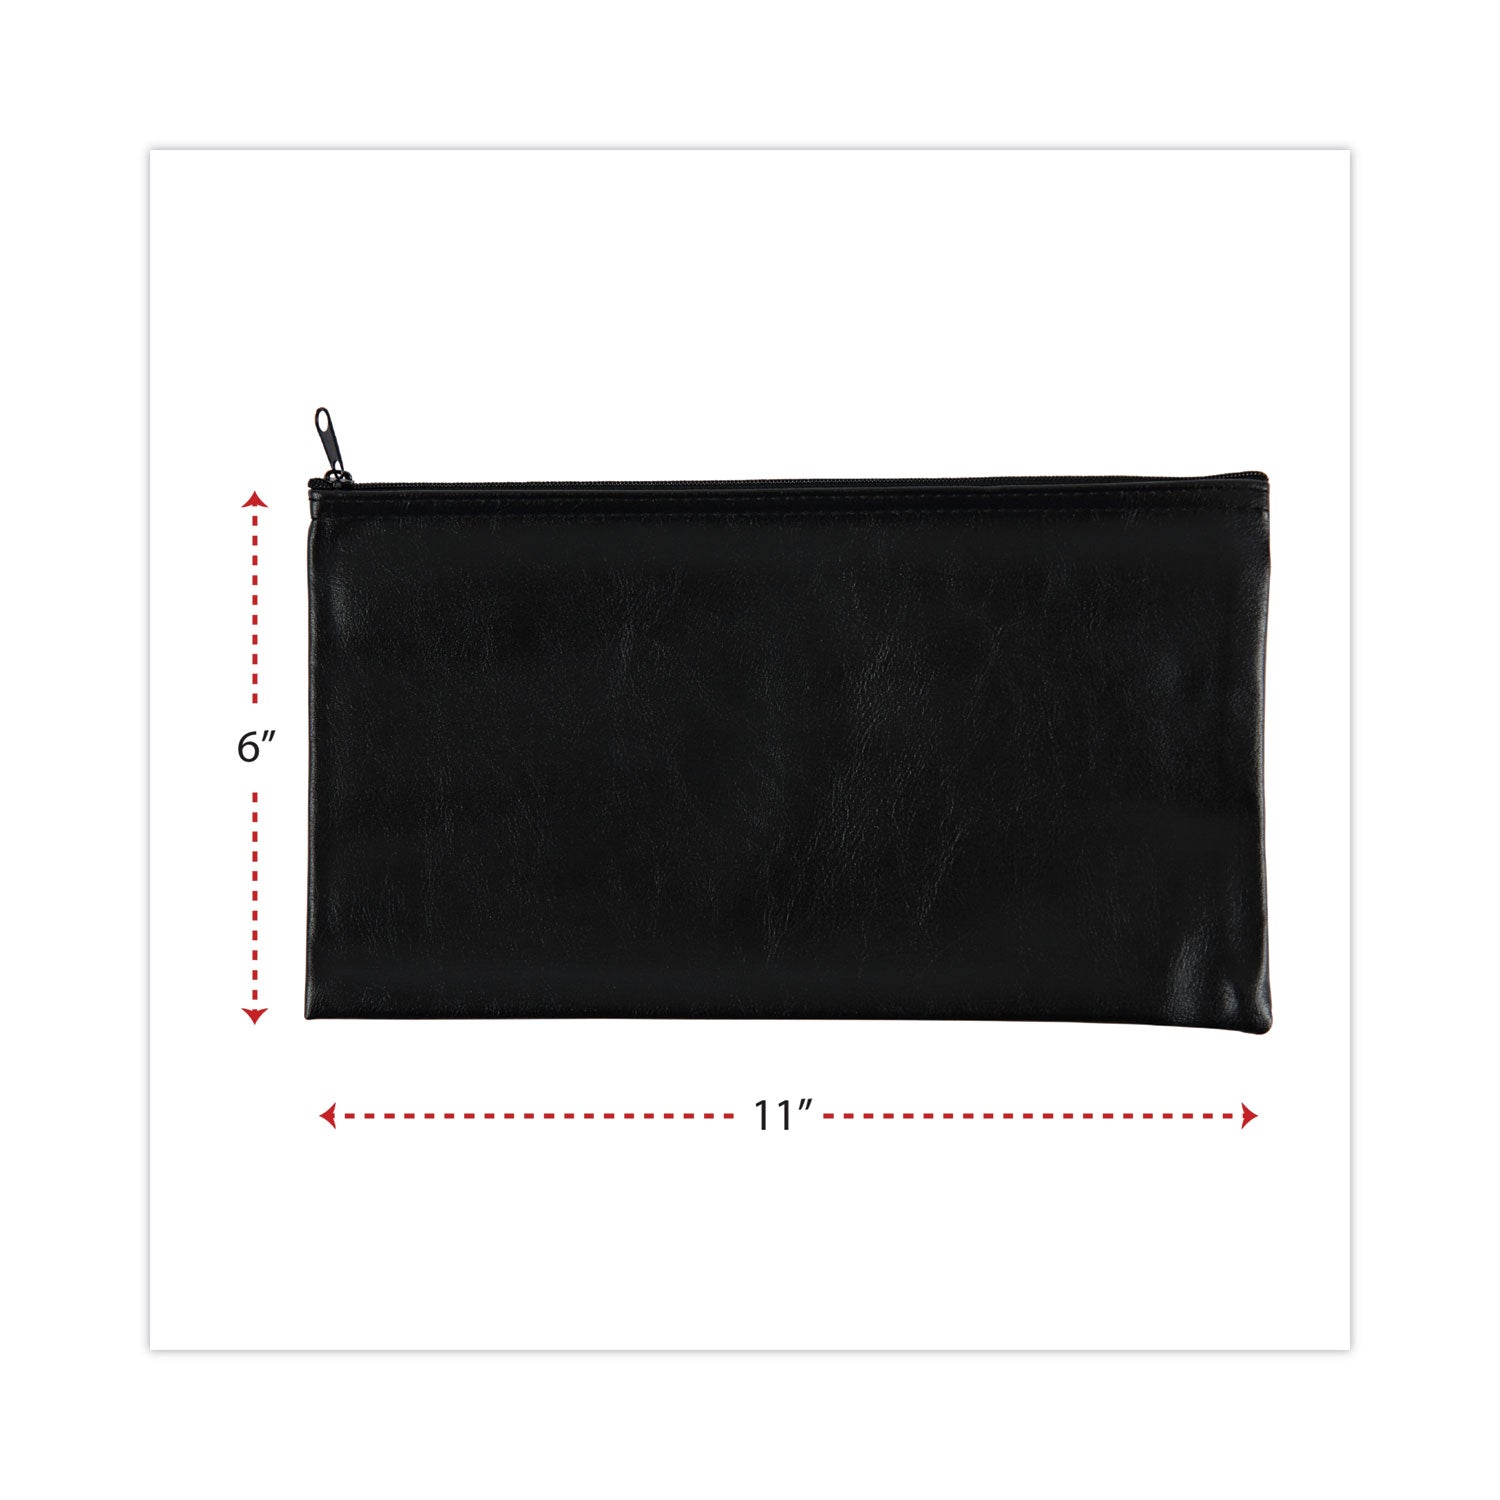 zippered-wallets-cases-leatherette-pu-11-x-6-black-2-pack_unv69021 - 3